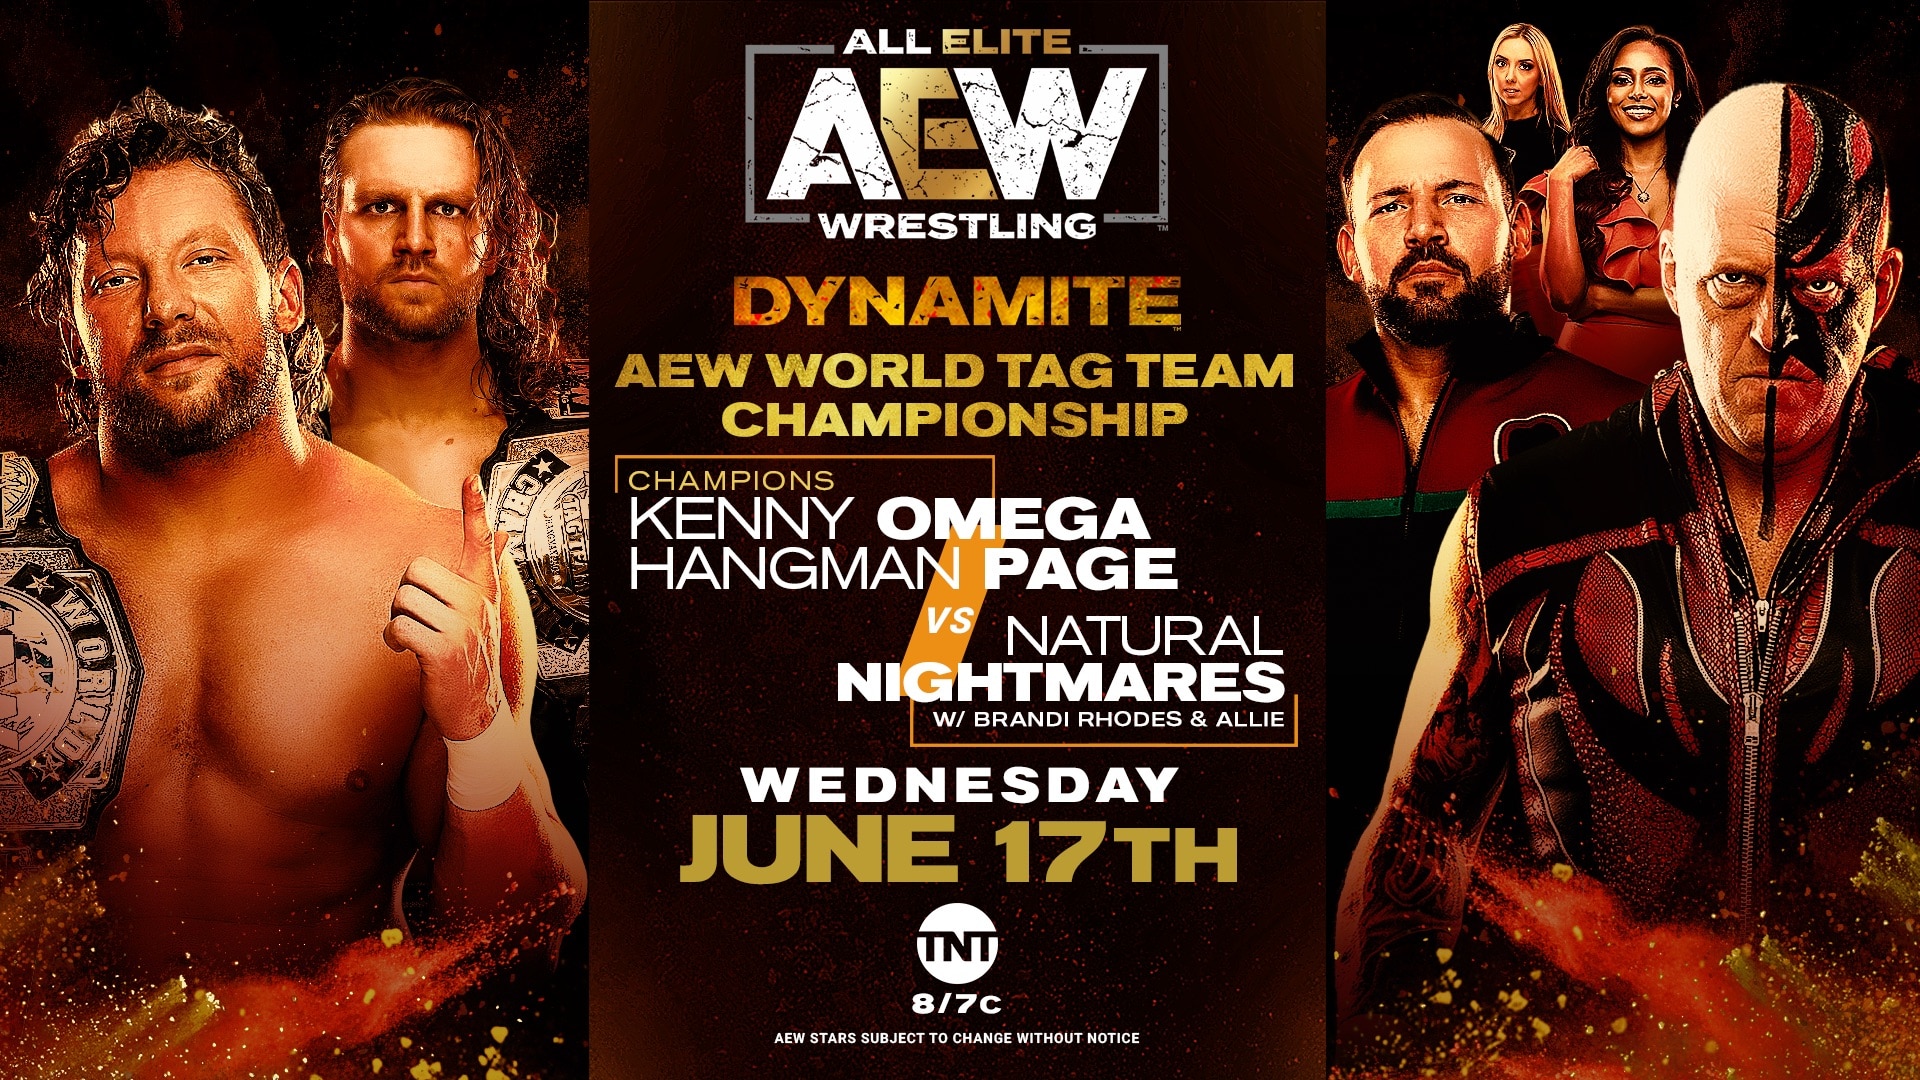 Natural Nightmares challenge the AEW World Tag Team Champions Hangman Page & Kenny Omega graphic.